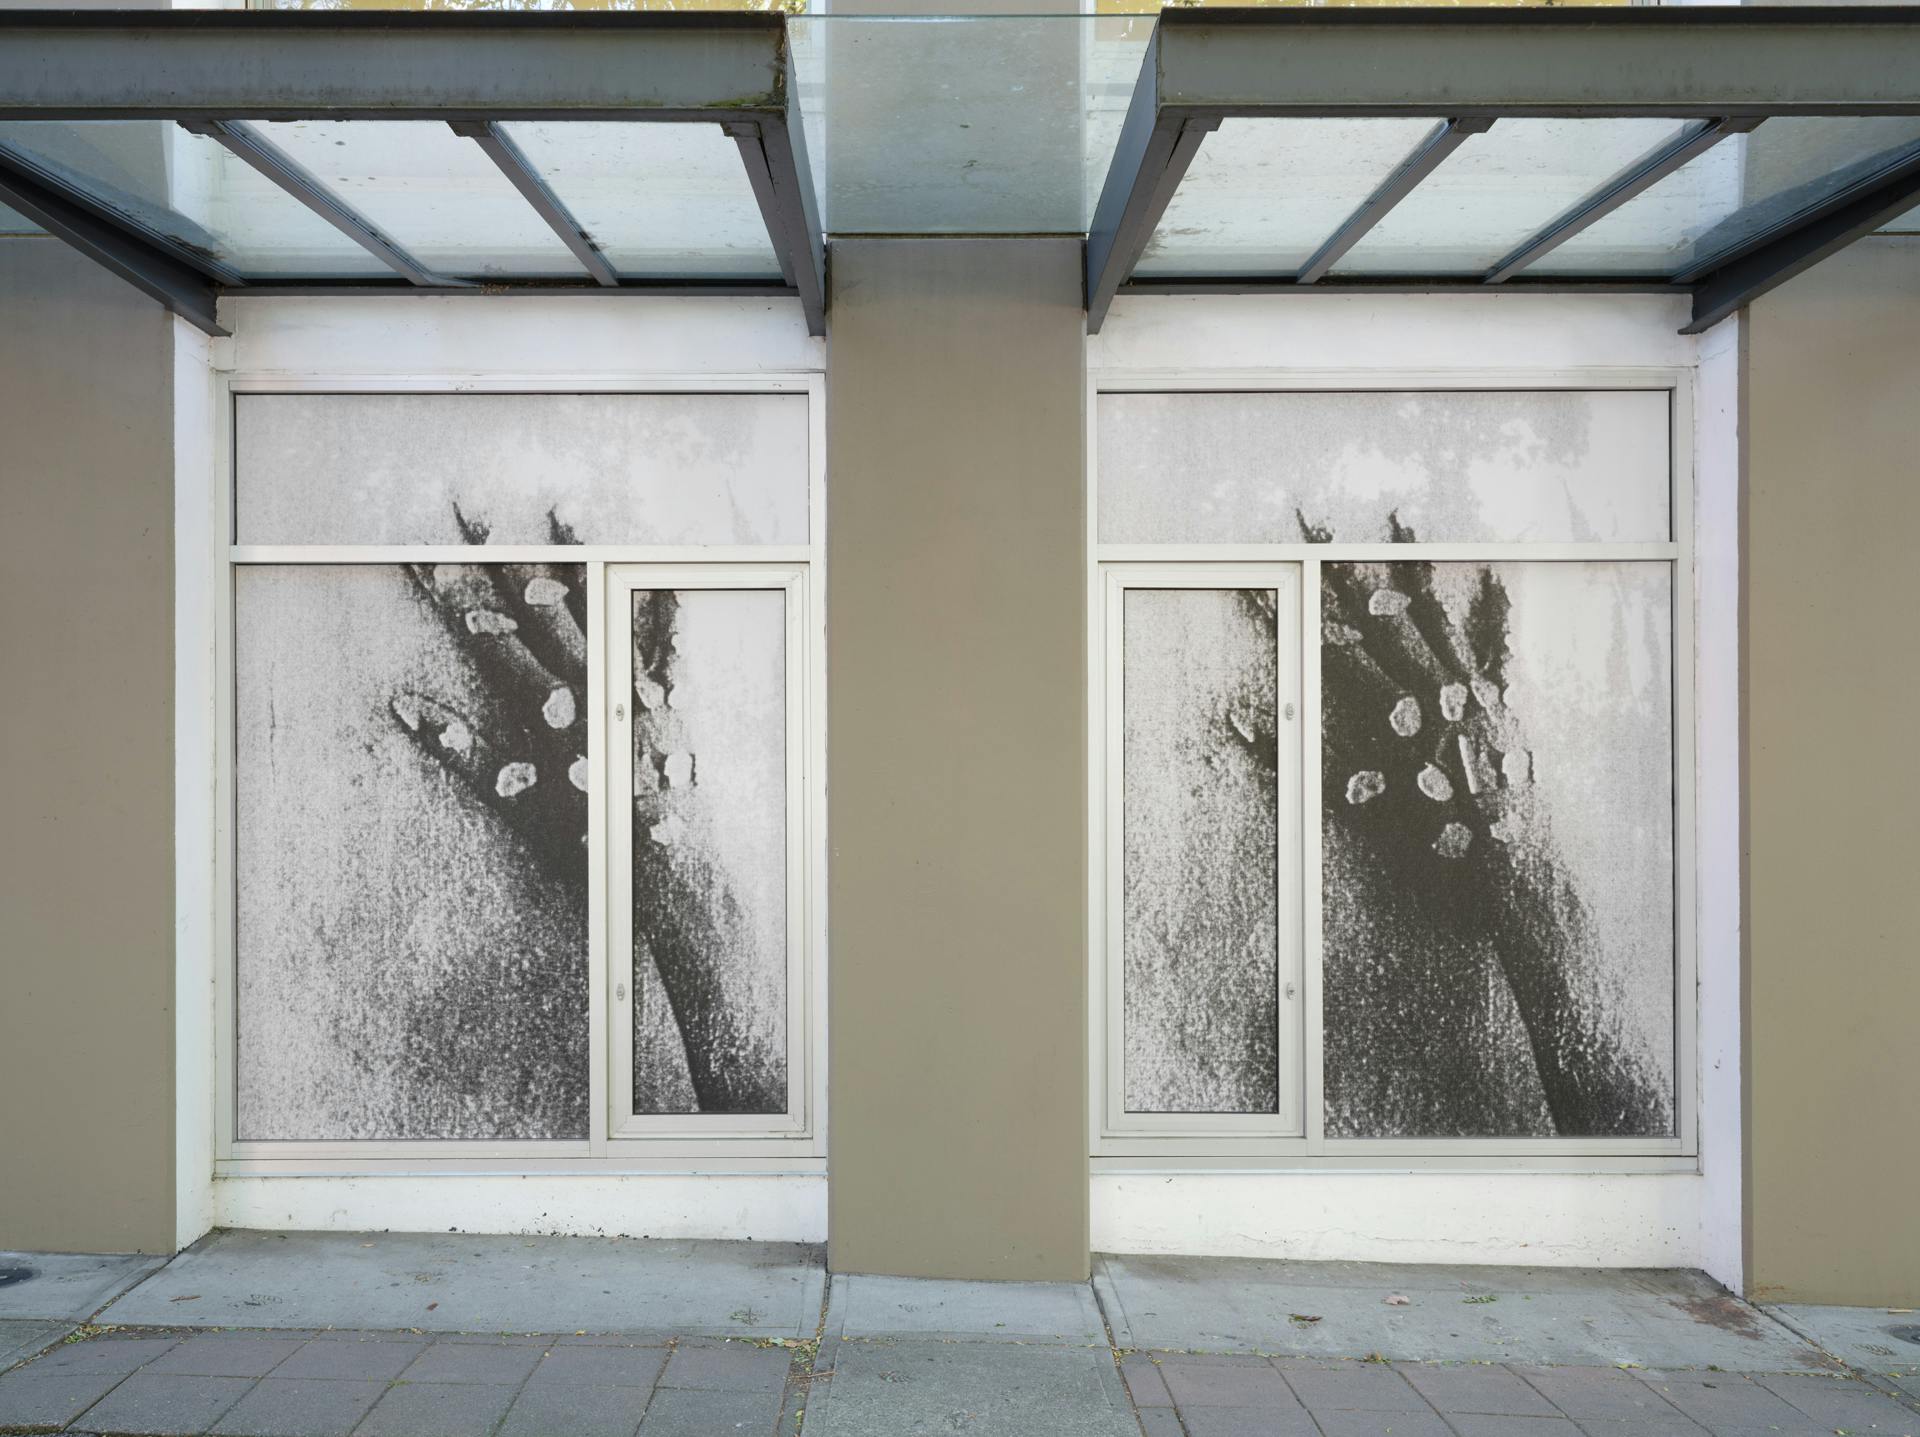 A pair of windows featuring a pair of images depicting a hand with small white pebbles placed on its joints. Both images are darker than is optimum, with the right image darker than the left one.